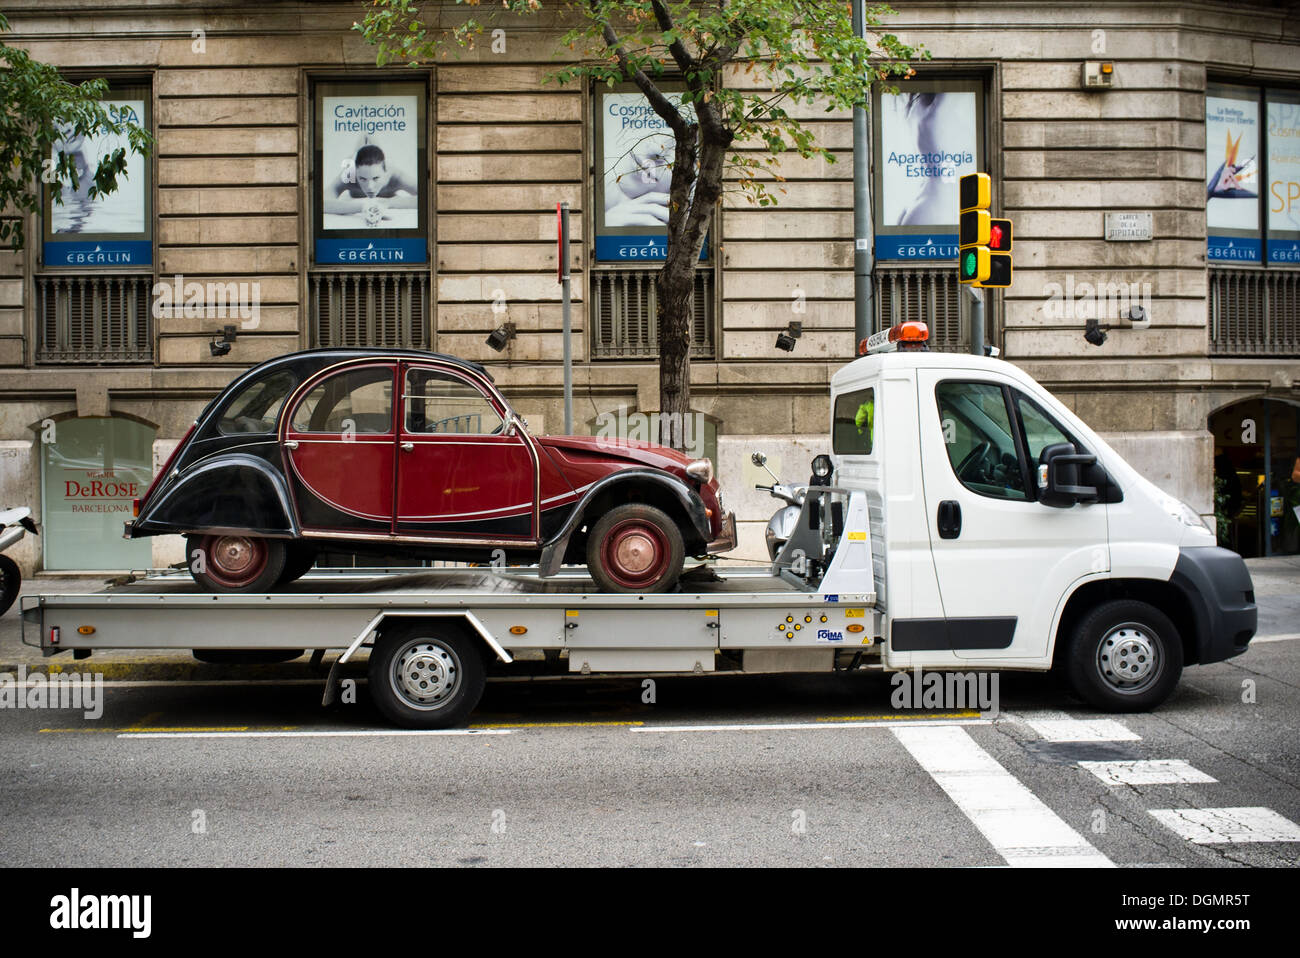 Citroën 2CV on a tow truck in Barcelona streets. Stock Photo